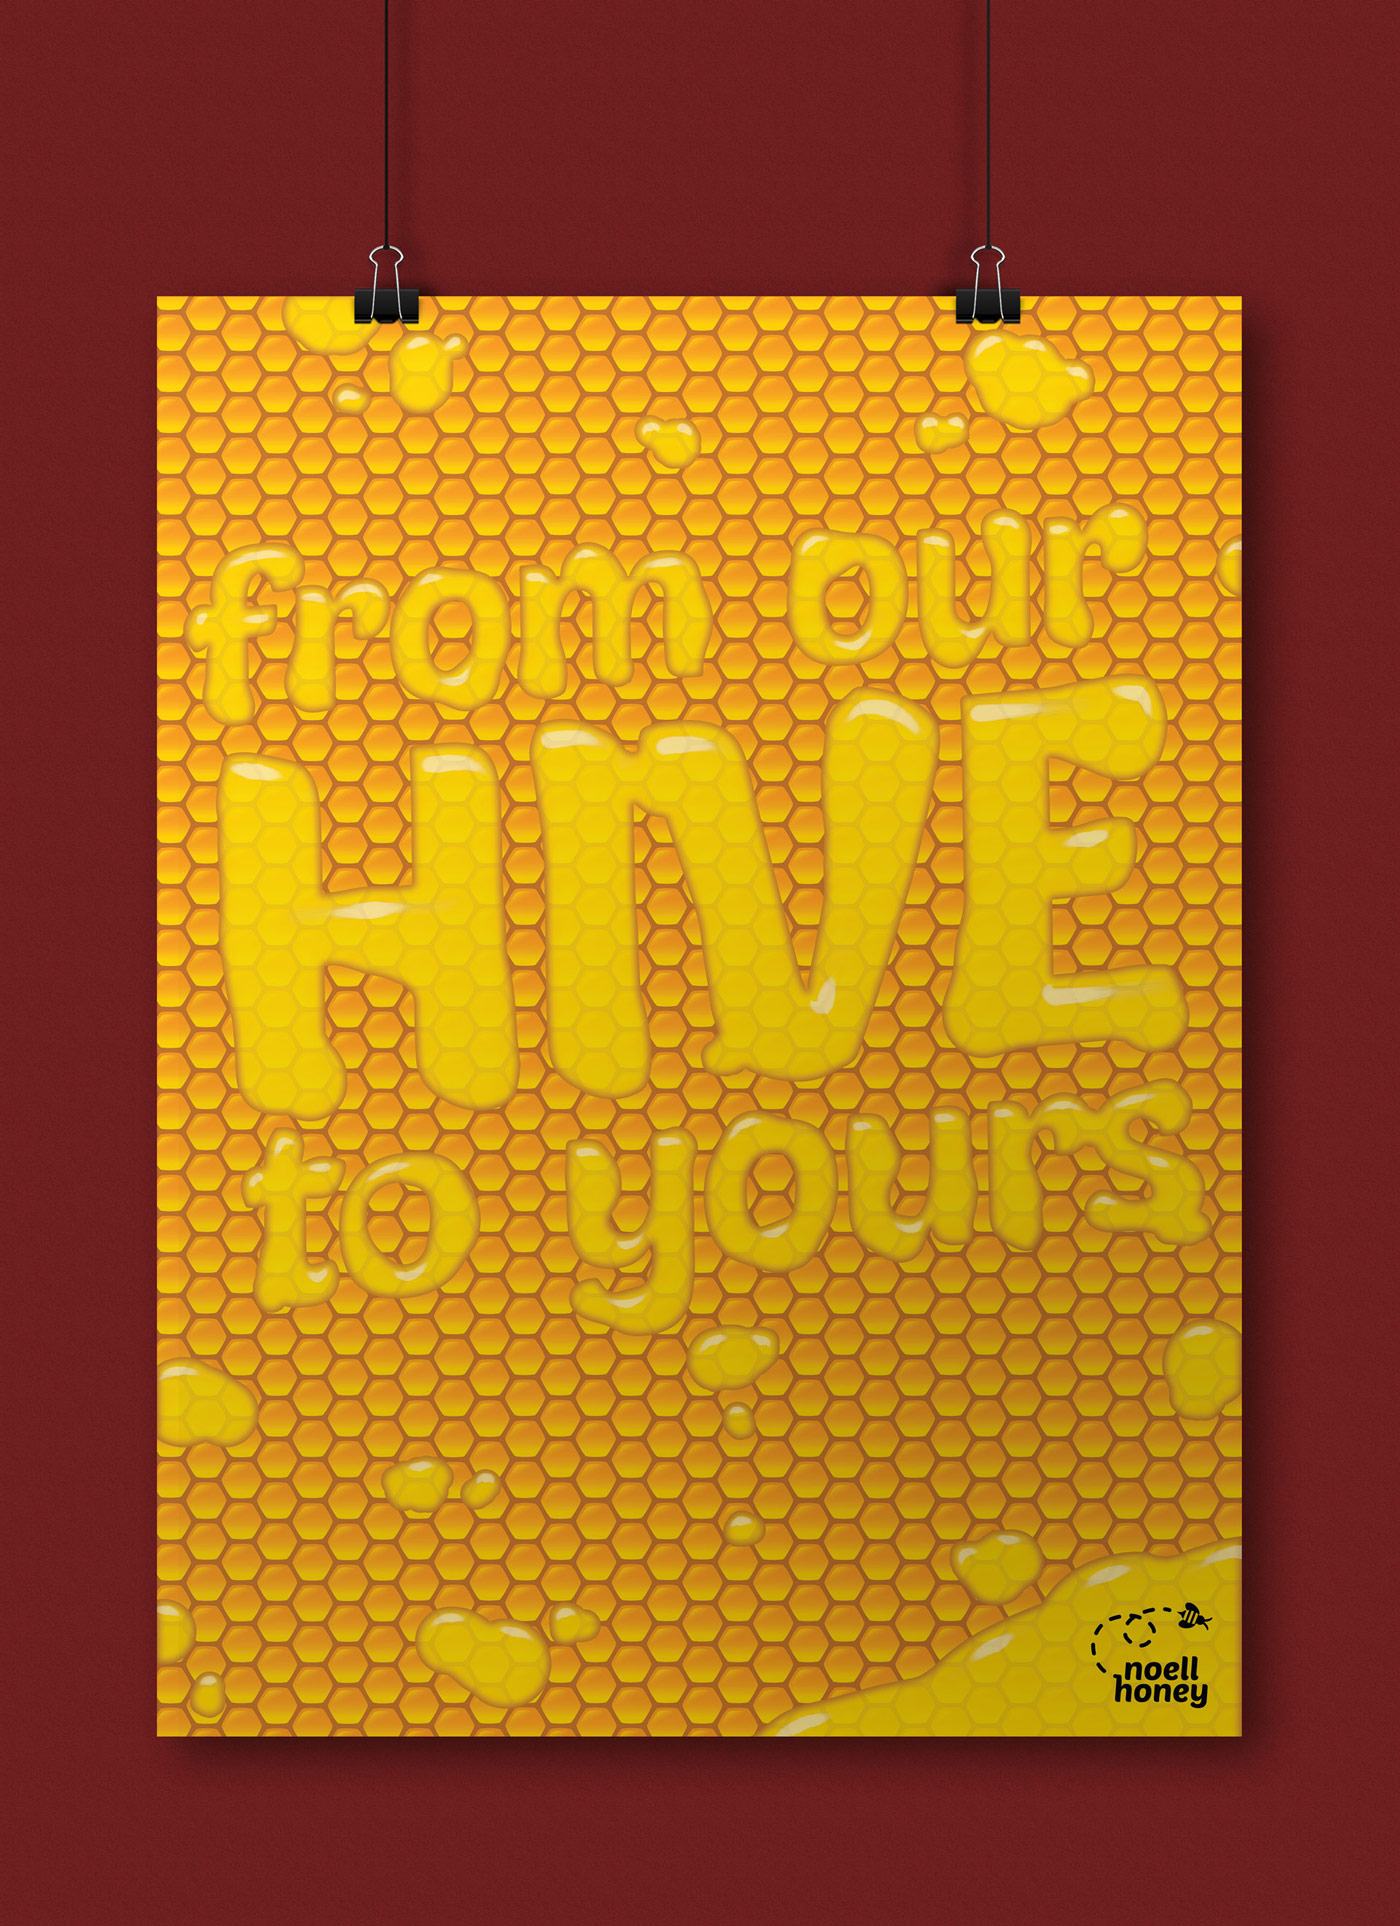 honeycomb poster with slogan